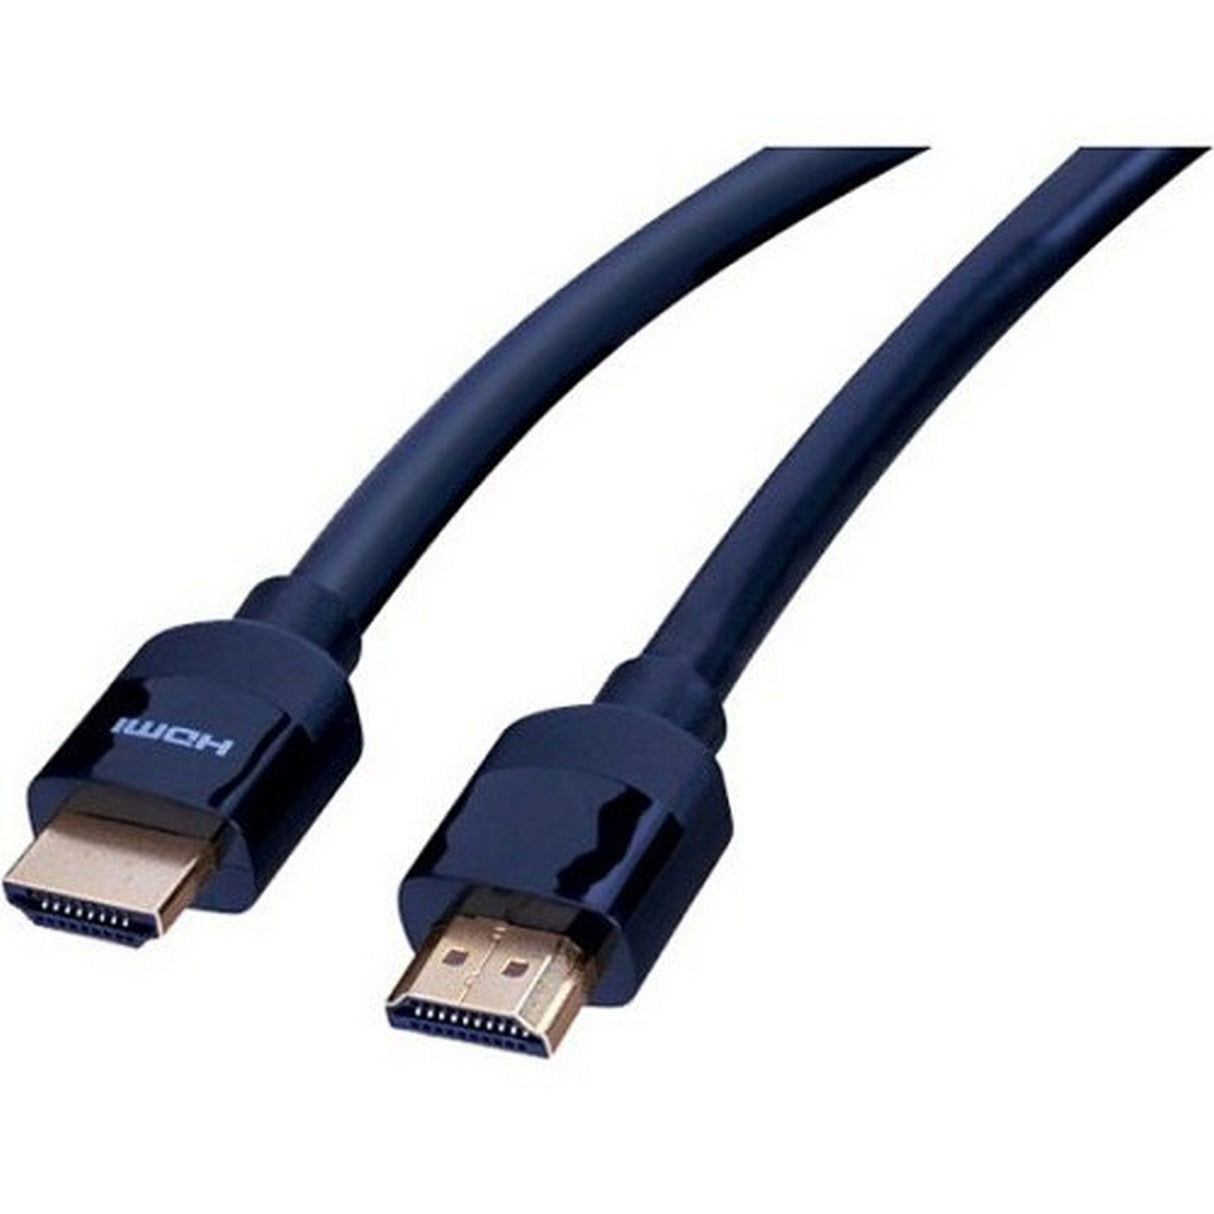 AVARRO 0E-HDMIP25 UHD 4K HDMI Cable with Ethernet, 25-Feet